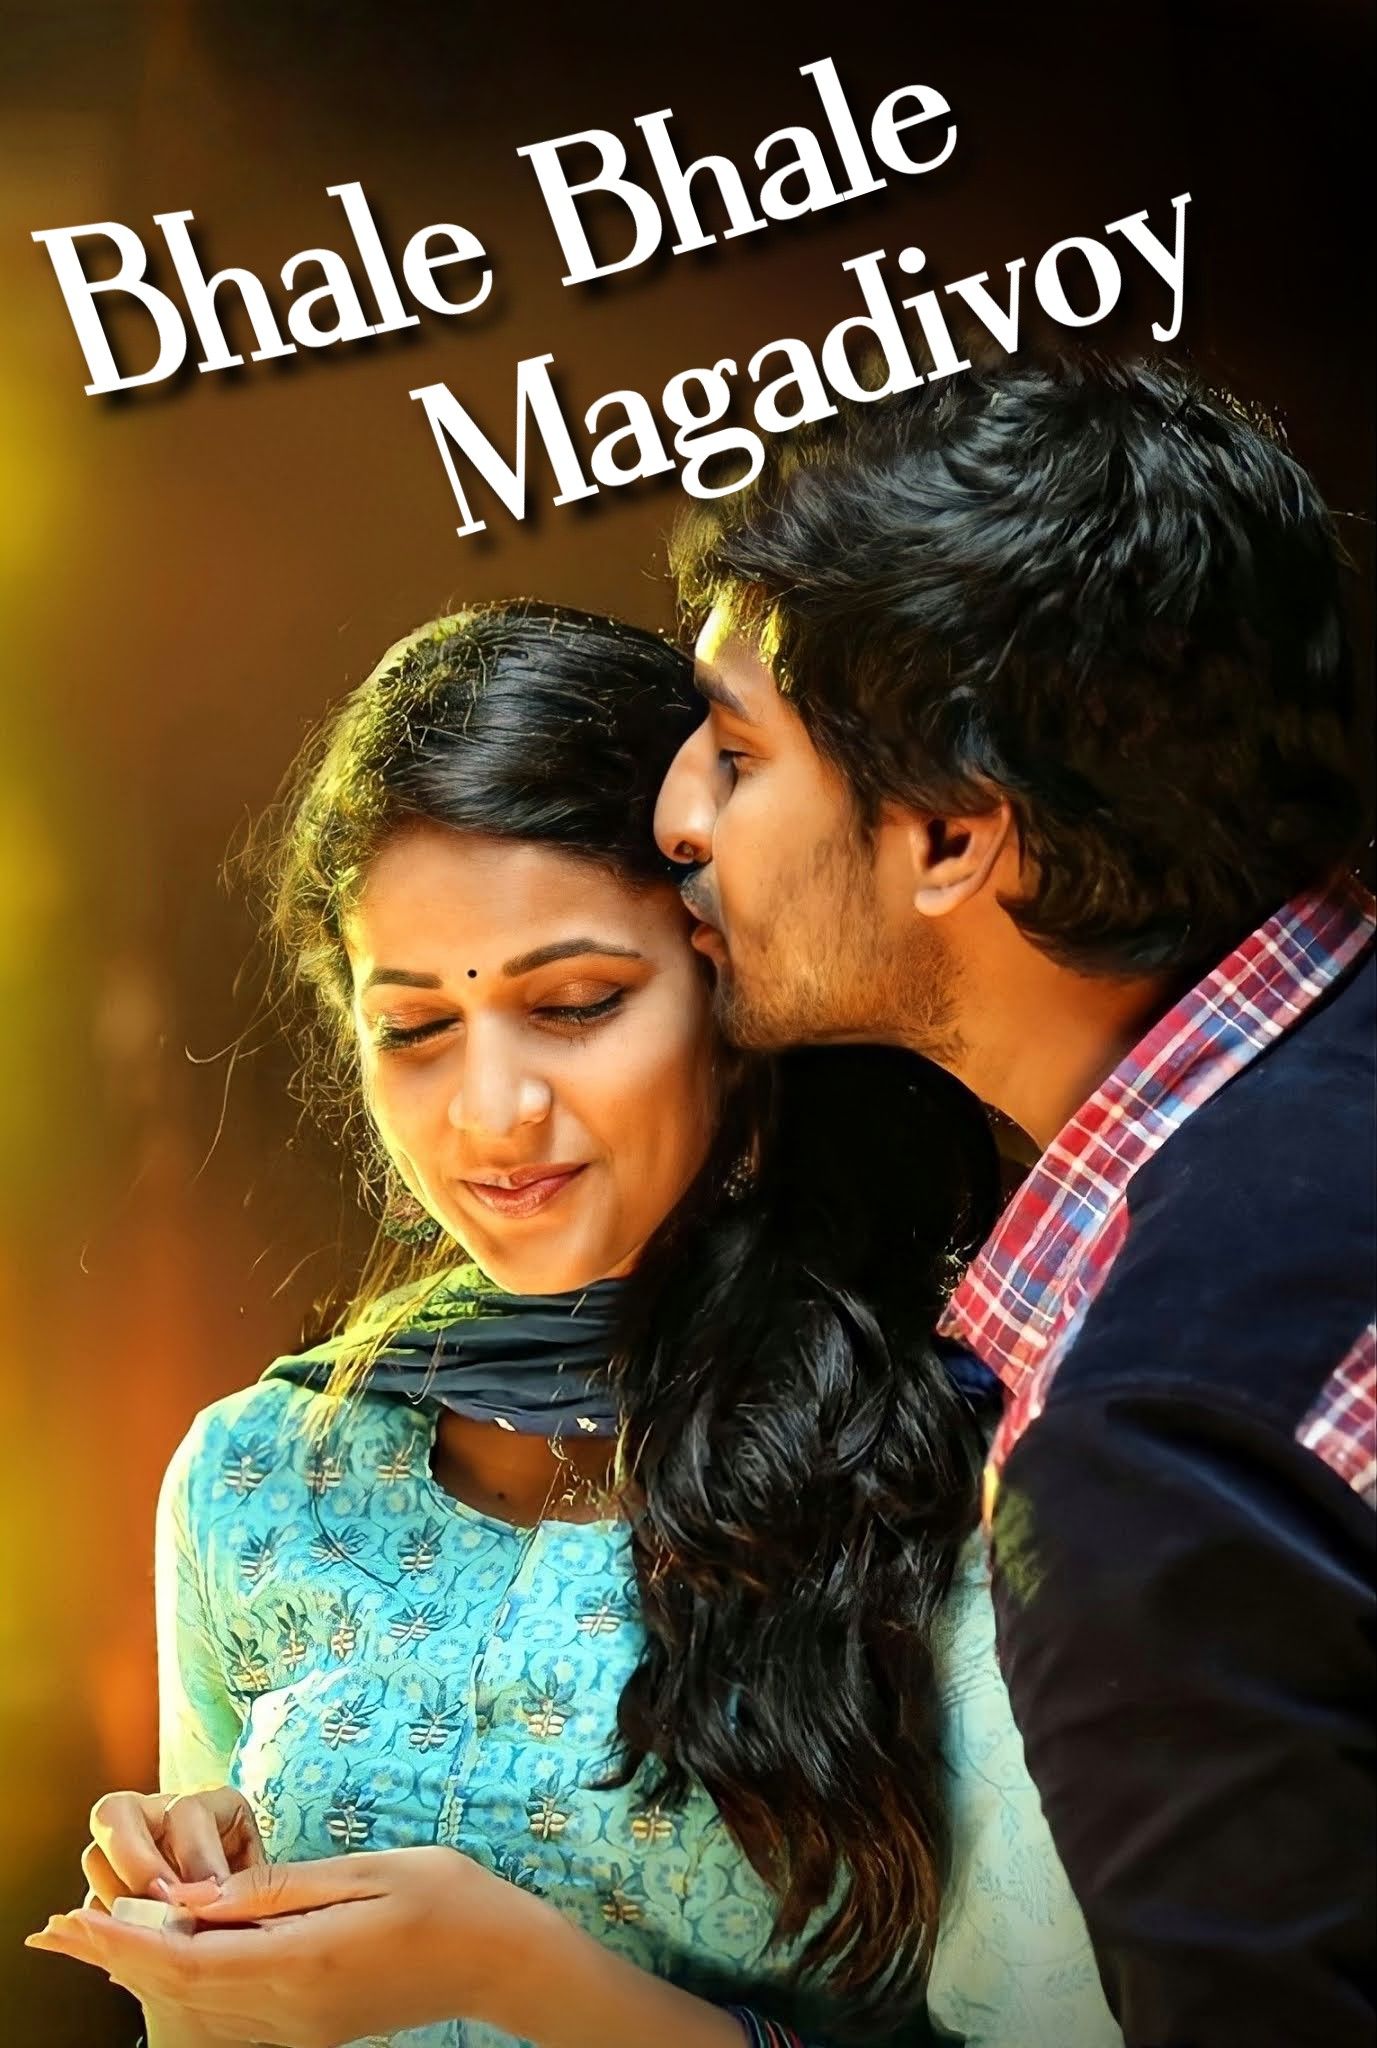 My Name Is Lucky (Bhale Bhale Magadivoy) 2023 Hindi Dubbed Movie download full movie